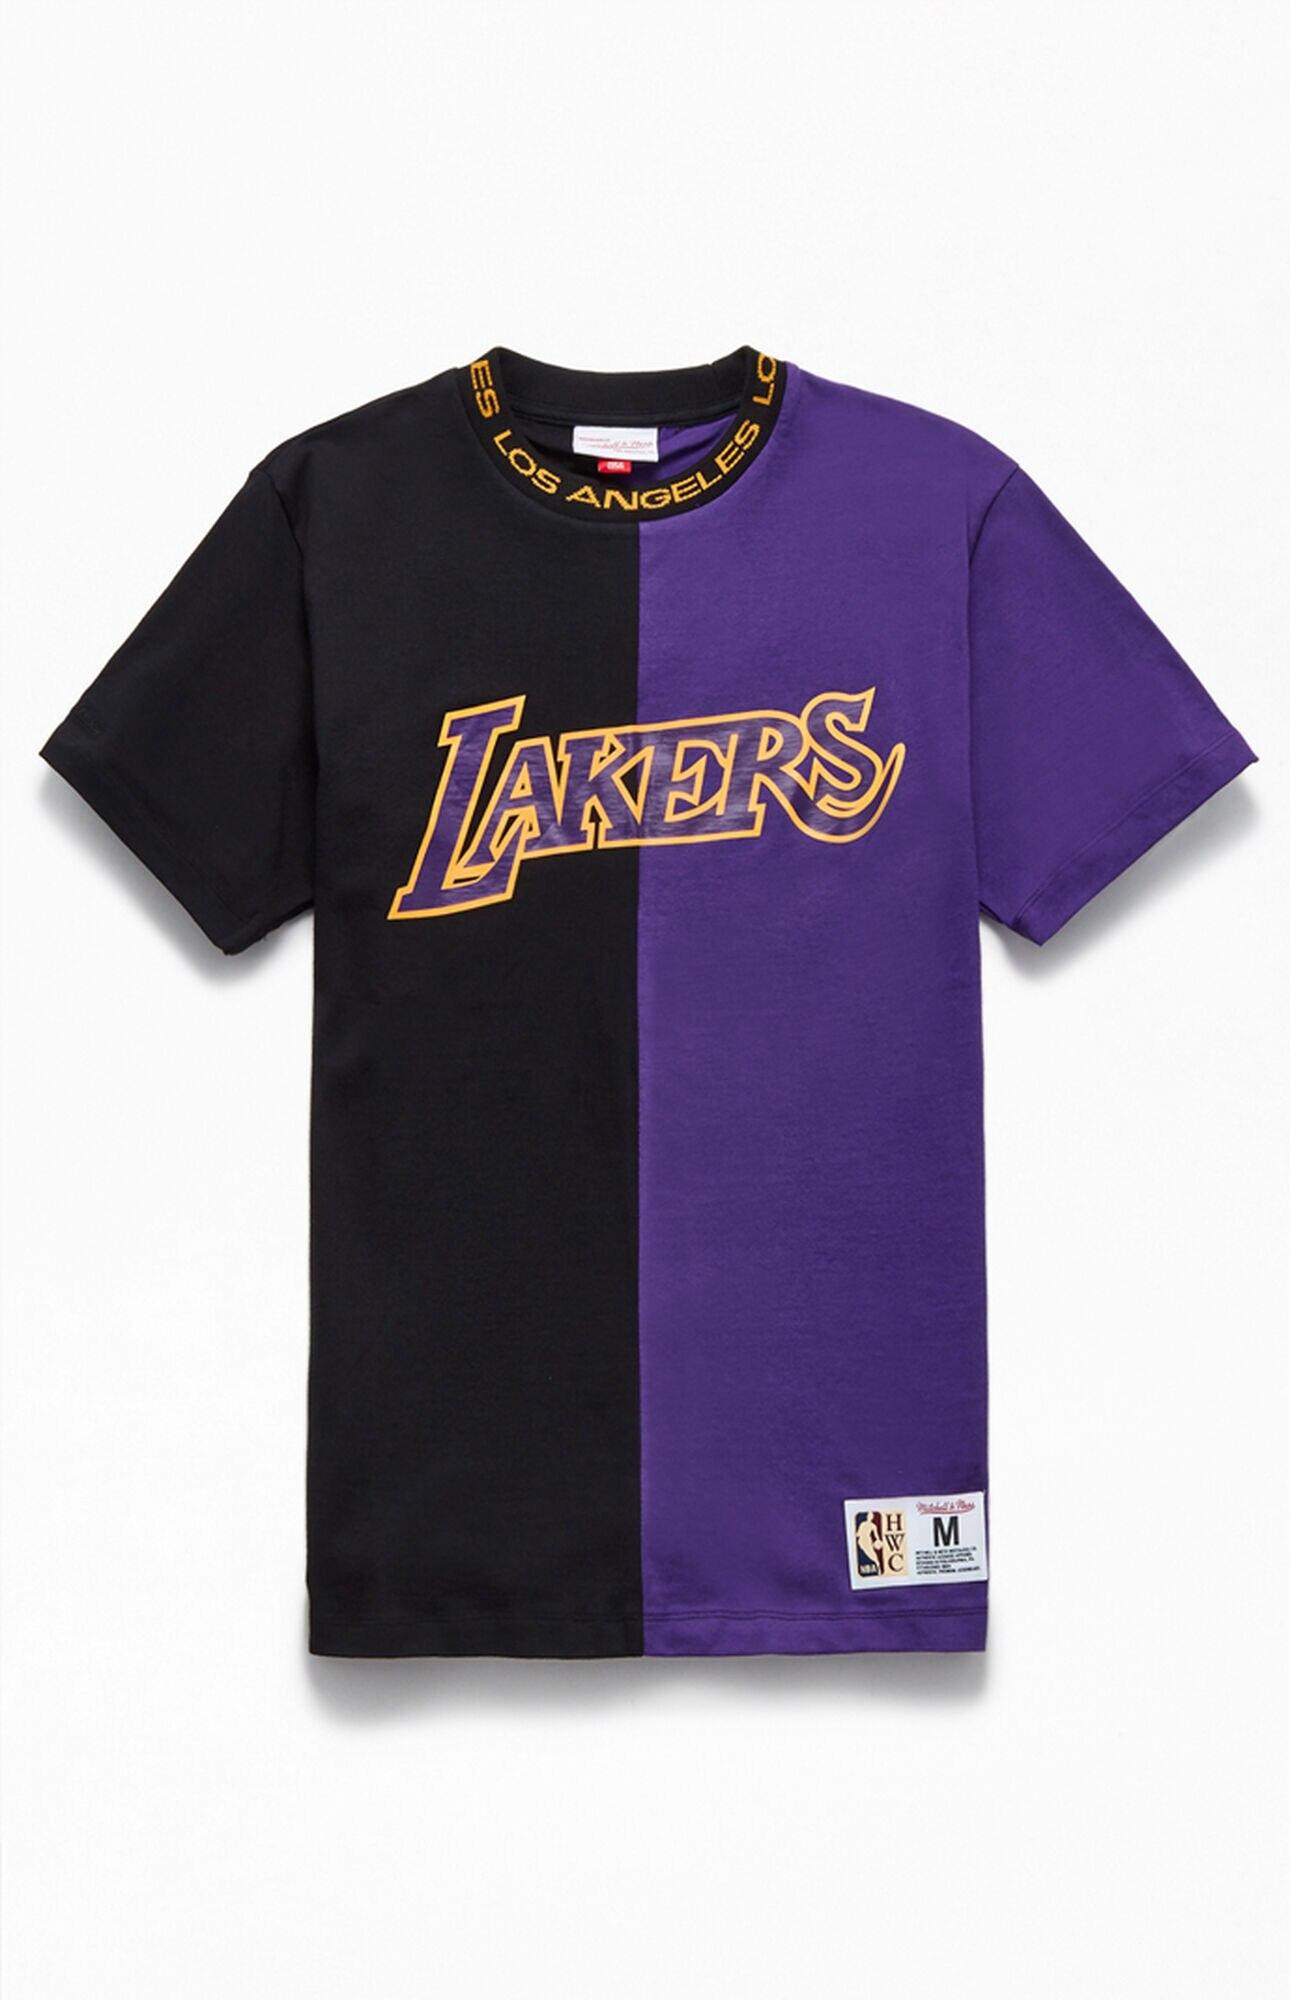 Undefeated Purple Shirt Lakers Colors You Can’t Beat LA SZ M 